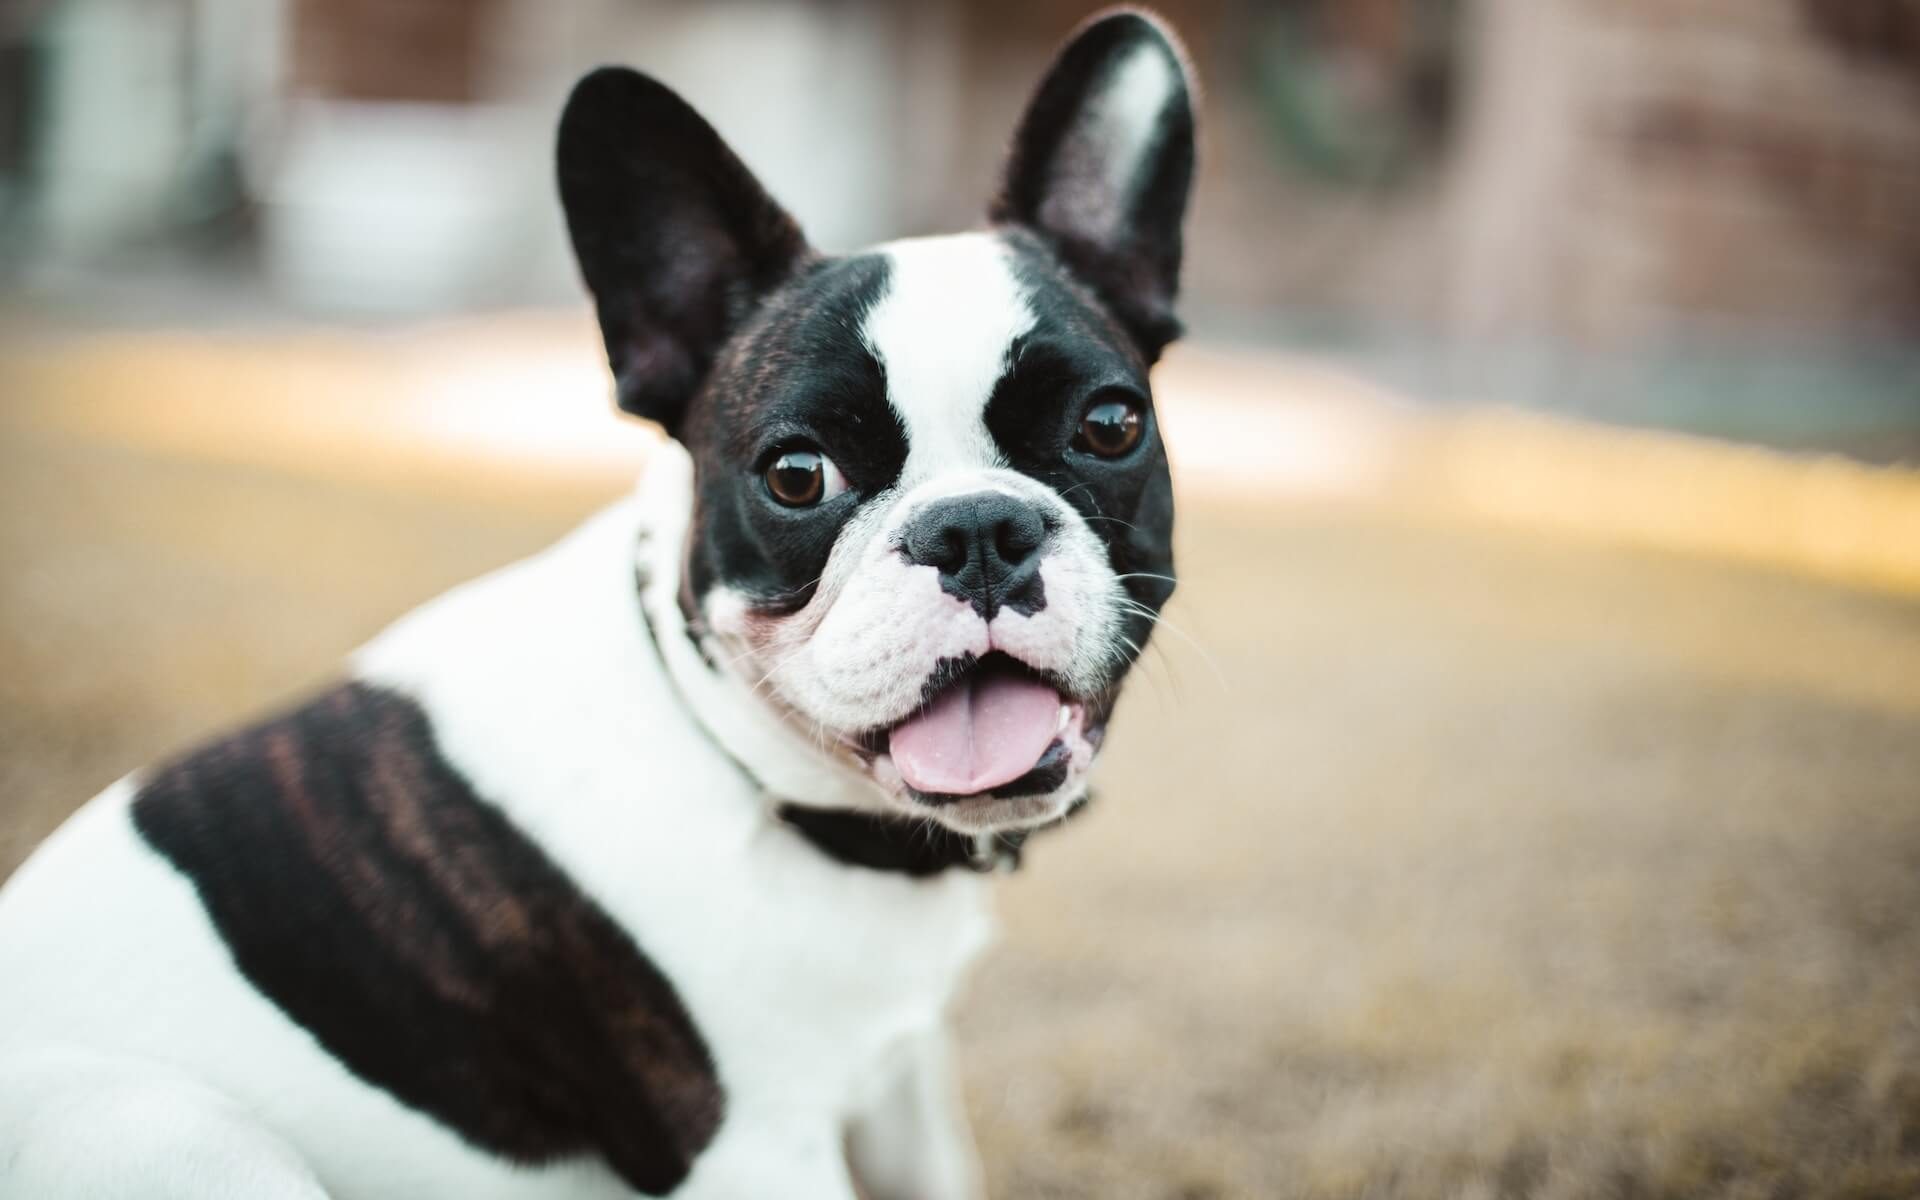 A cute and wrinkled-faced French Bulldog.